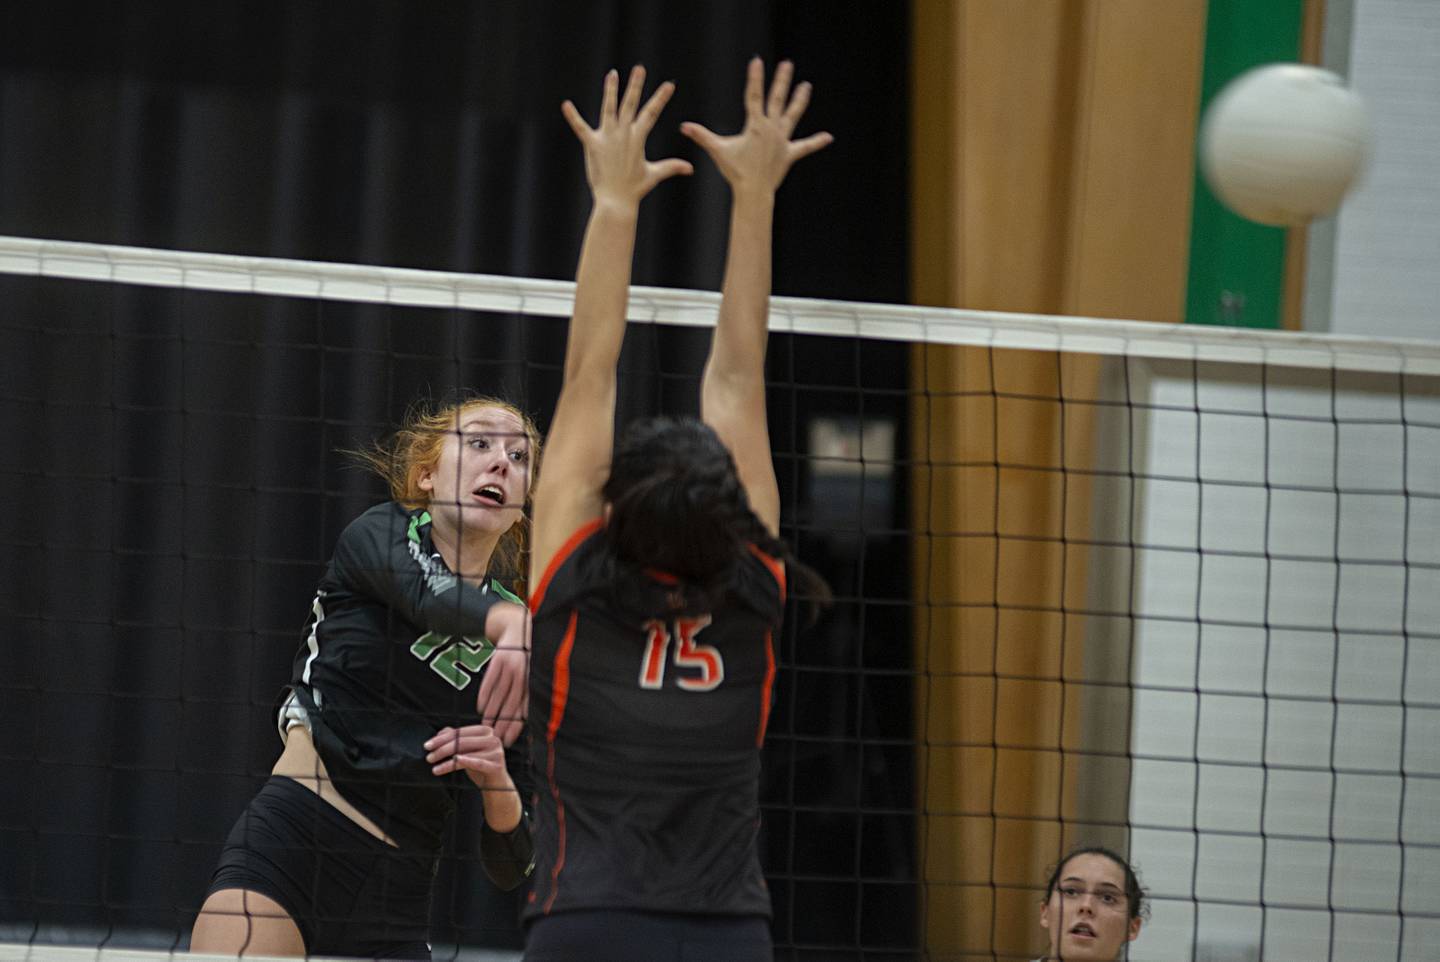 Rock Falls' Emily Lego plays the match winner in game one against Winnebago Tuesday, Sept. 27, 2022.